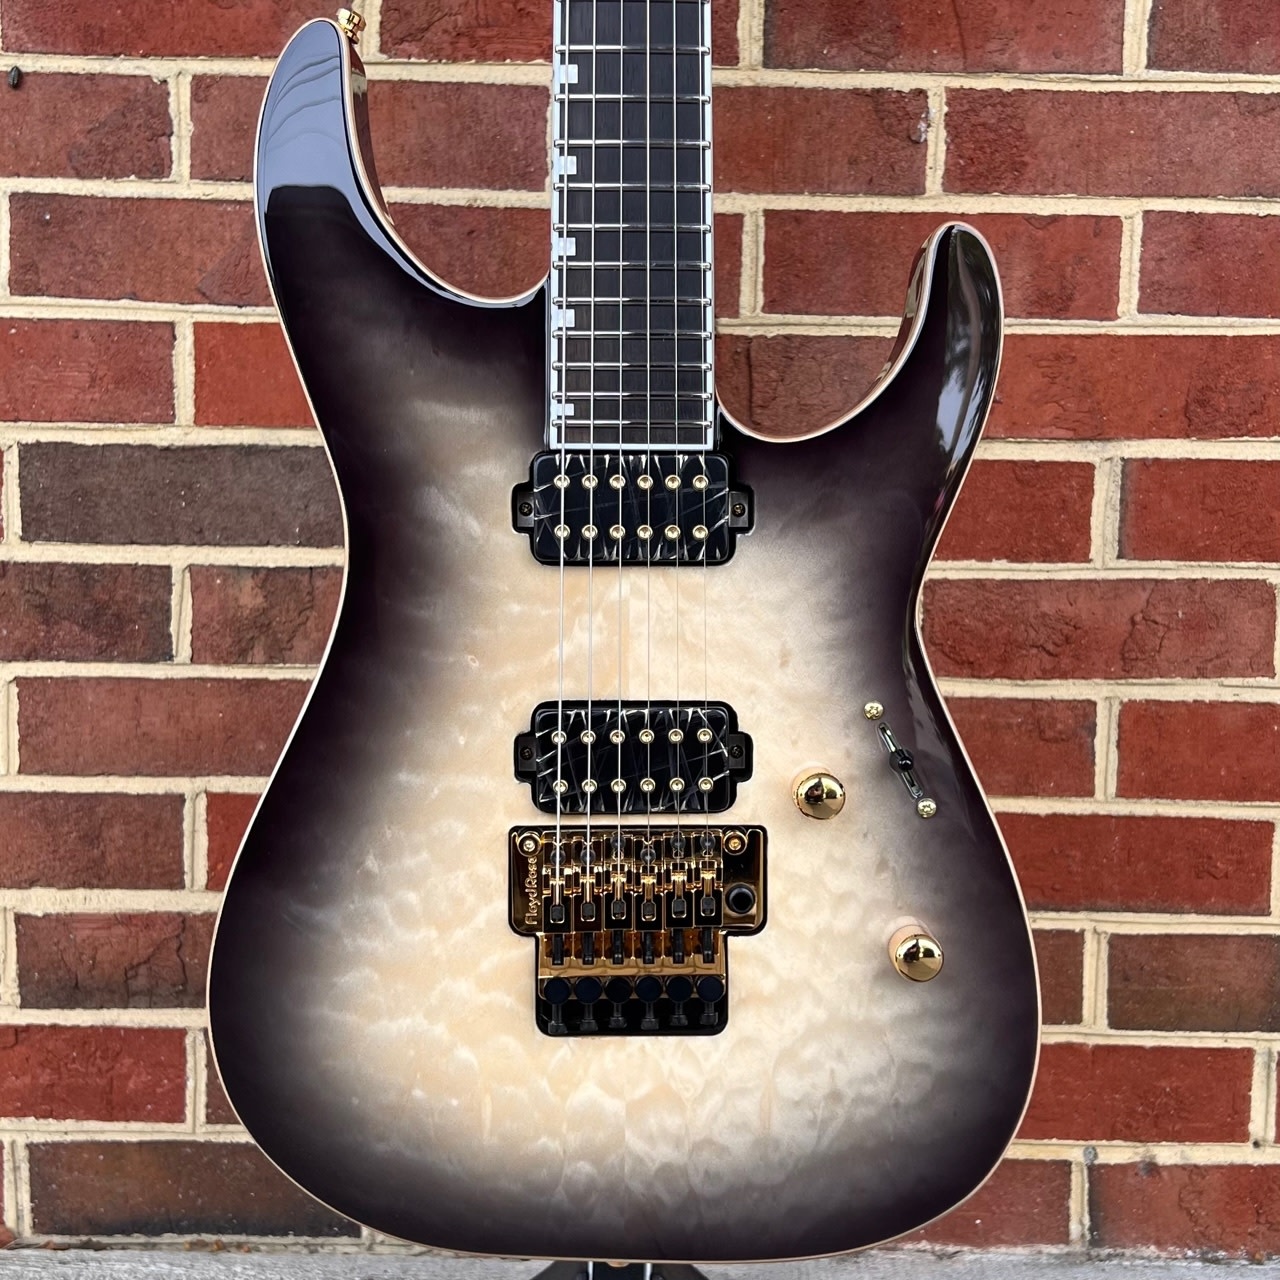 ESP E-II M-II, Black Natural Burst, Quilted Maple Top, Bareknuckle  Aftermath Pickups, Locking Tuners, Hardshell Case